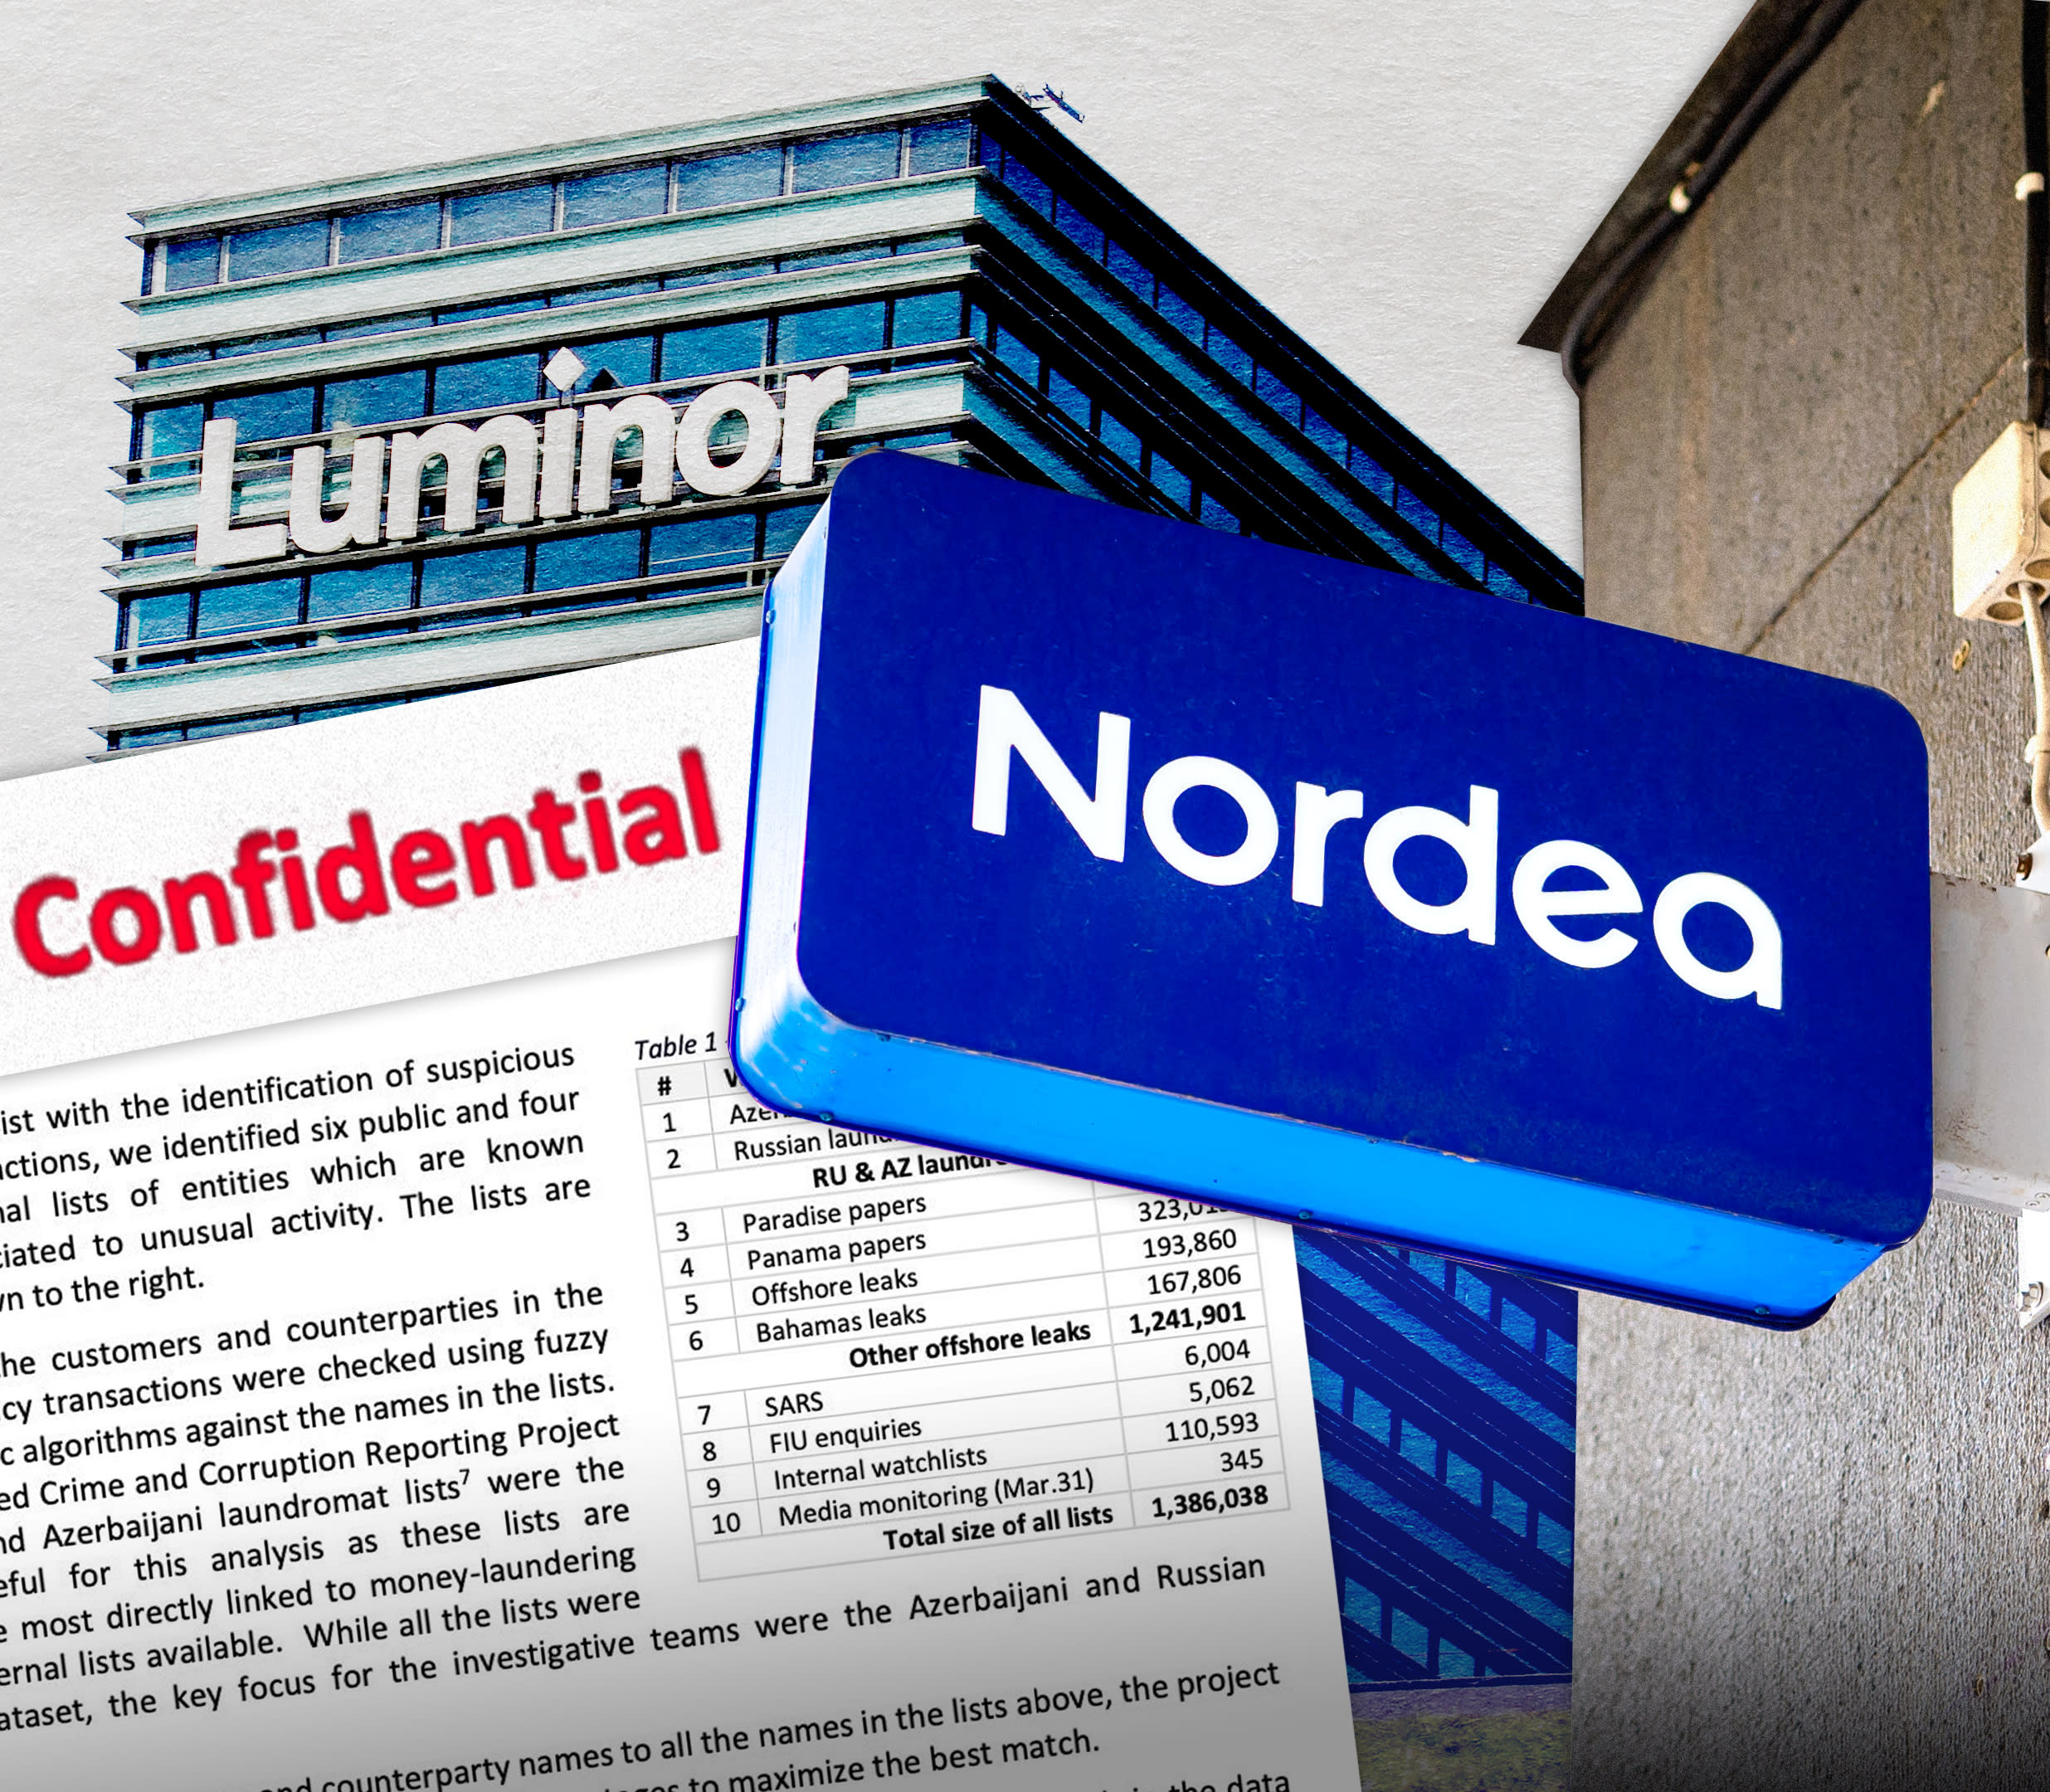 Yle: A leaked inspection shows that Nordea has ignored money laundering concerns